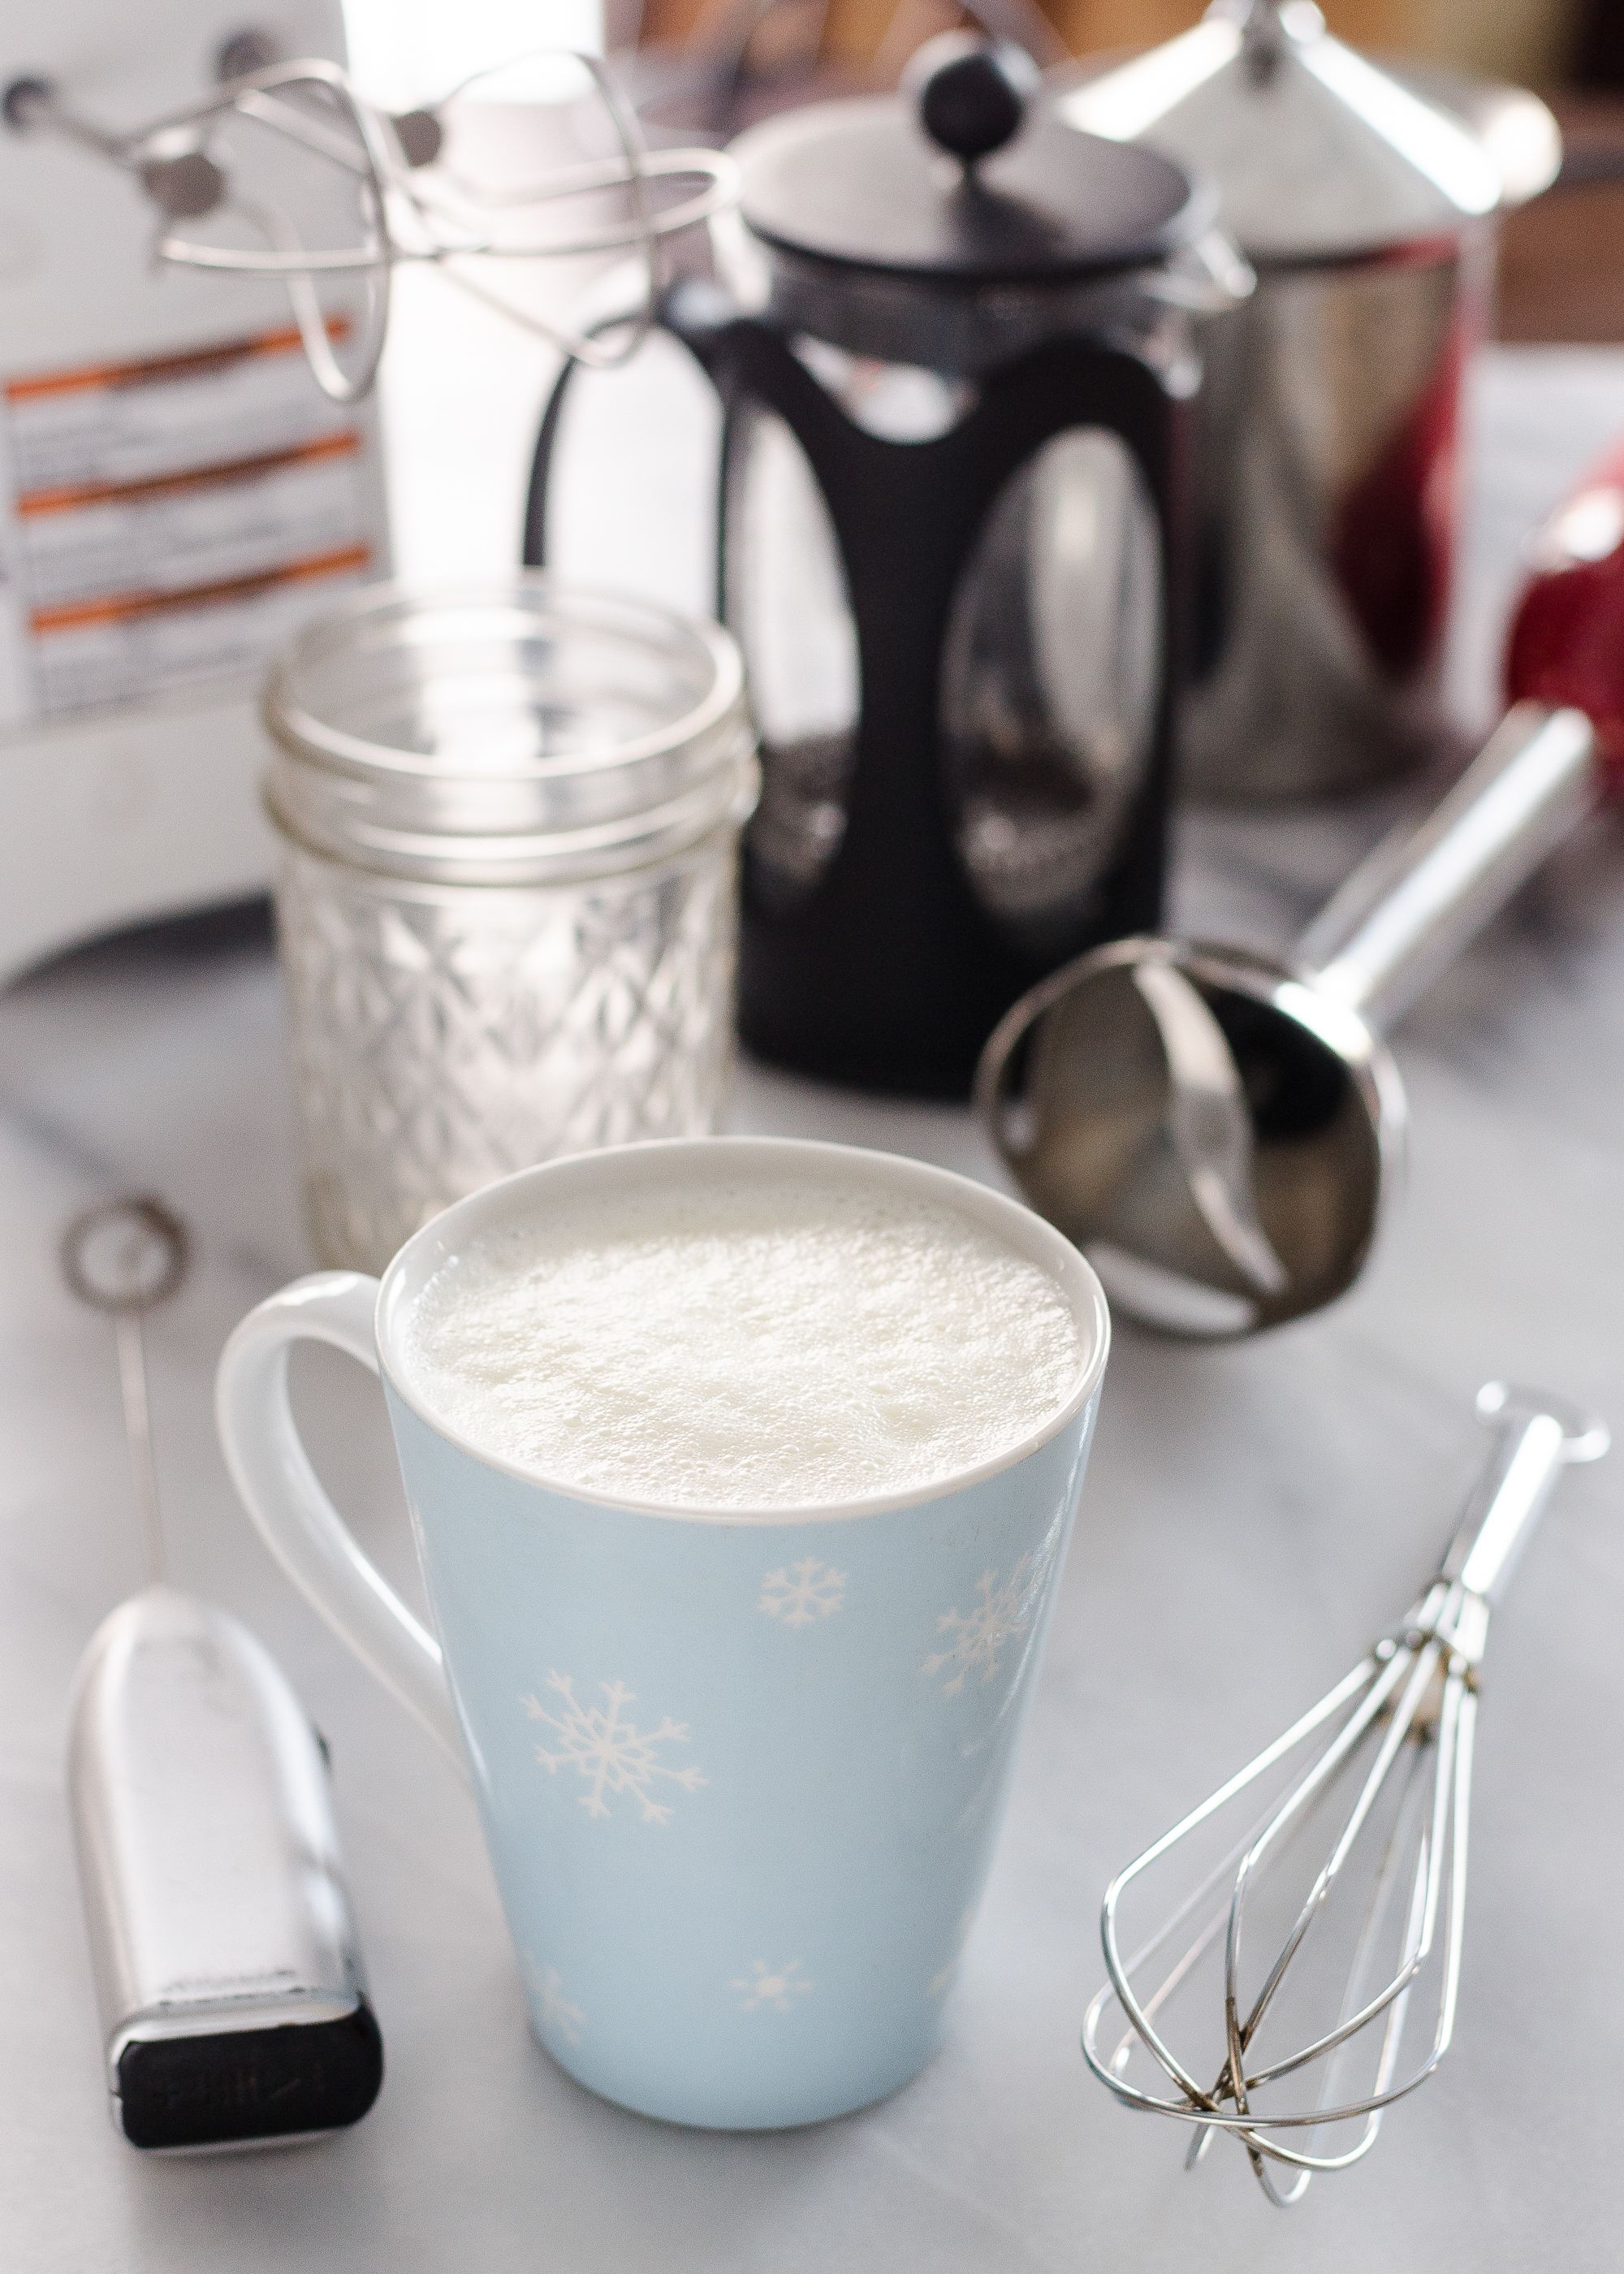 How to Froth Milk Without a Fancy Instrument